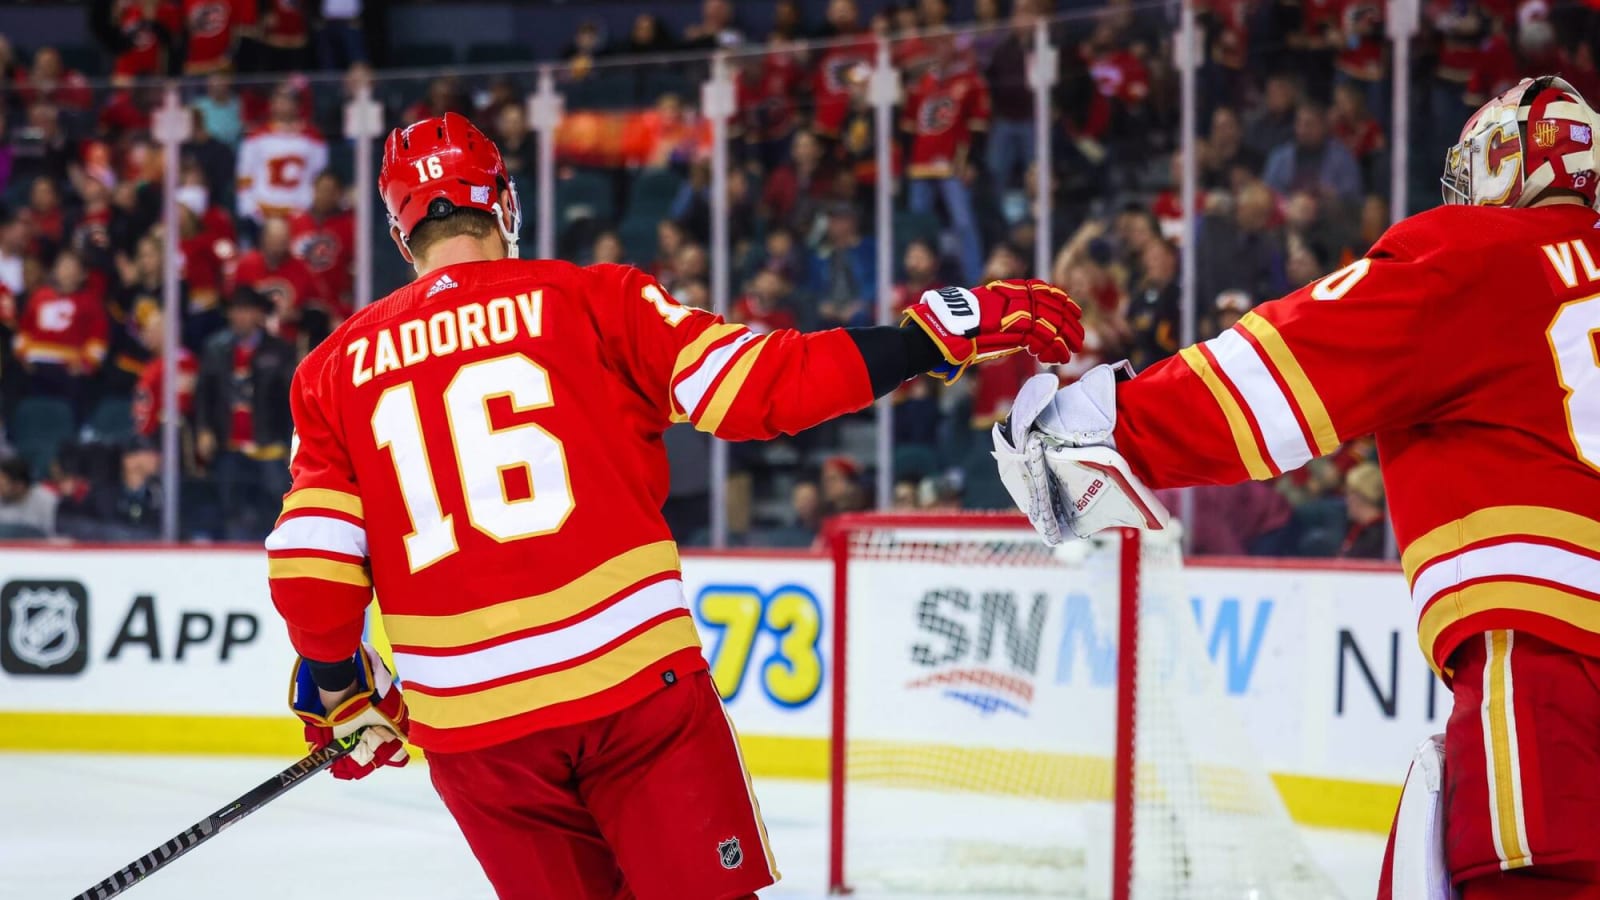 Nikita Zadorov speaks out on the Russian invasion of Ukraine: ‘I think it was just important to be vocal’